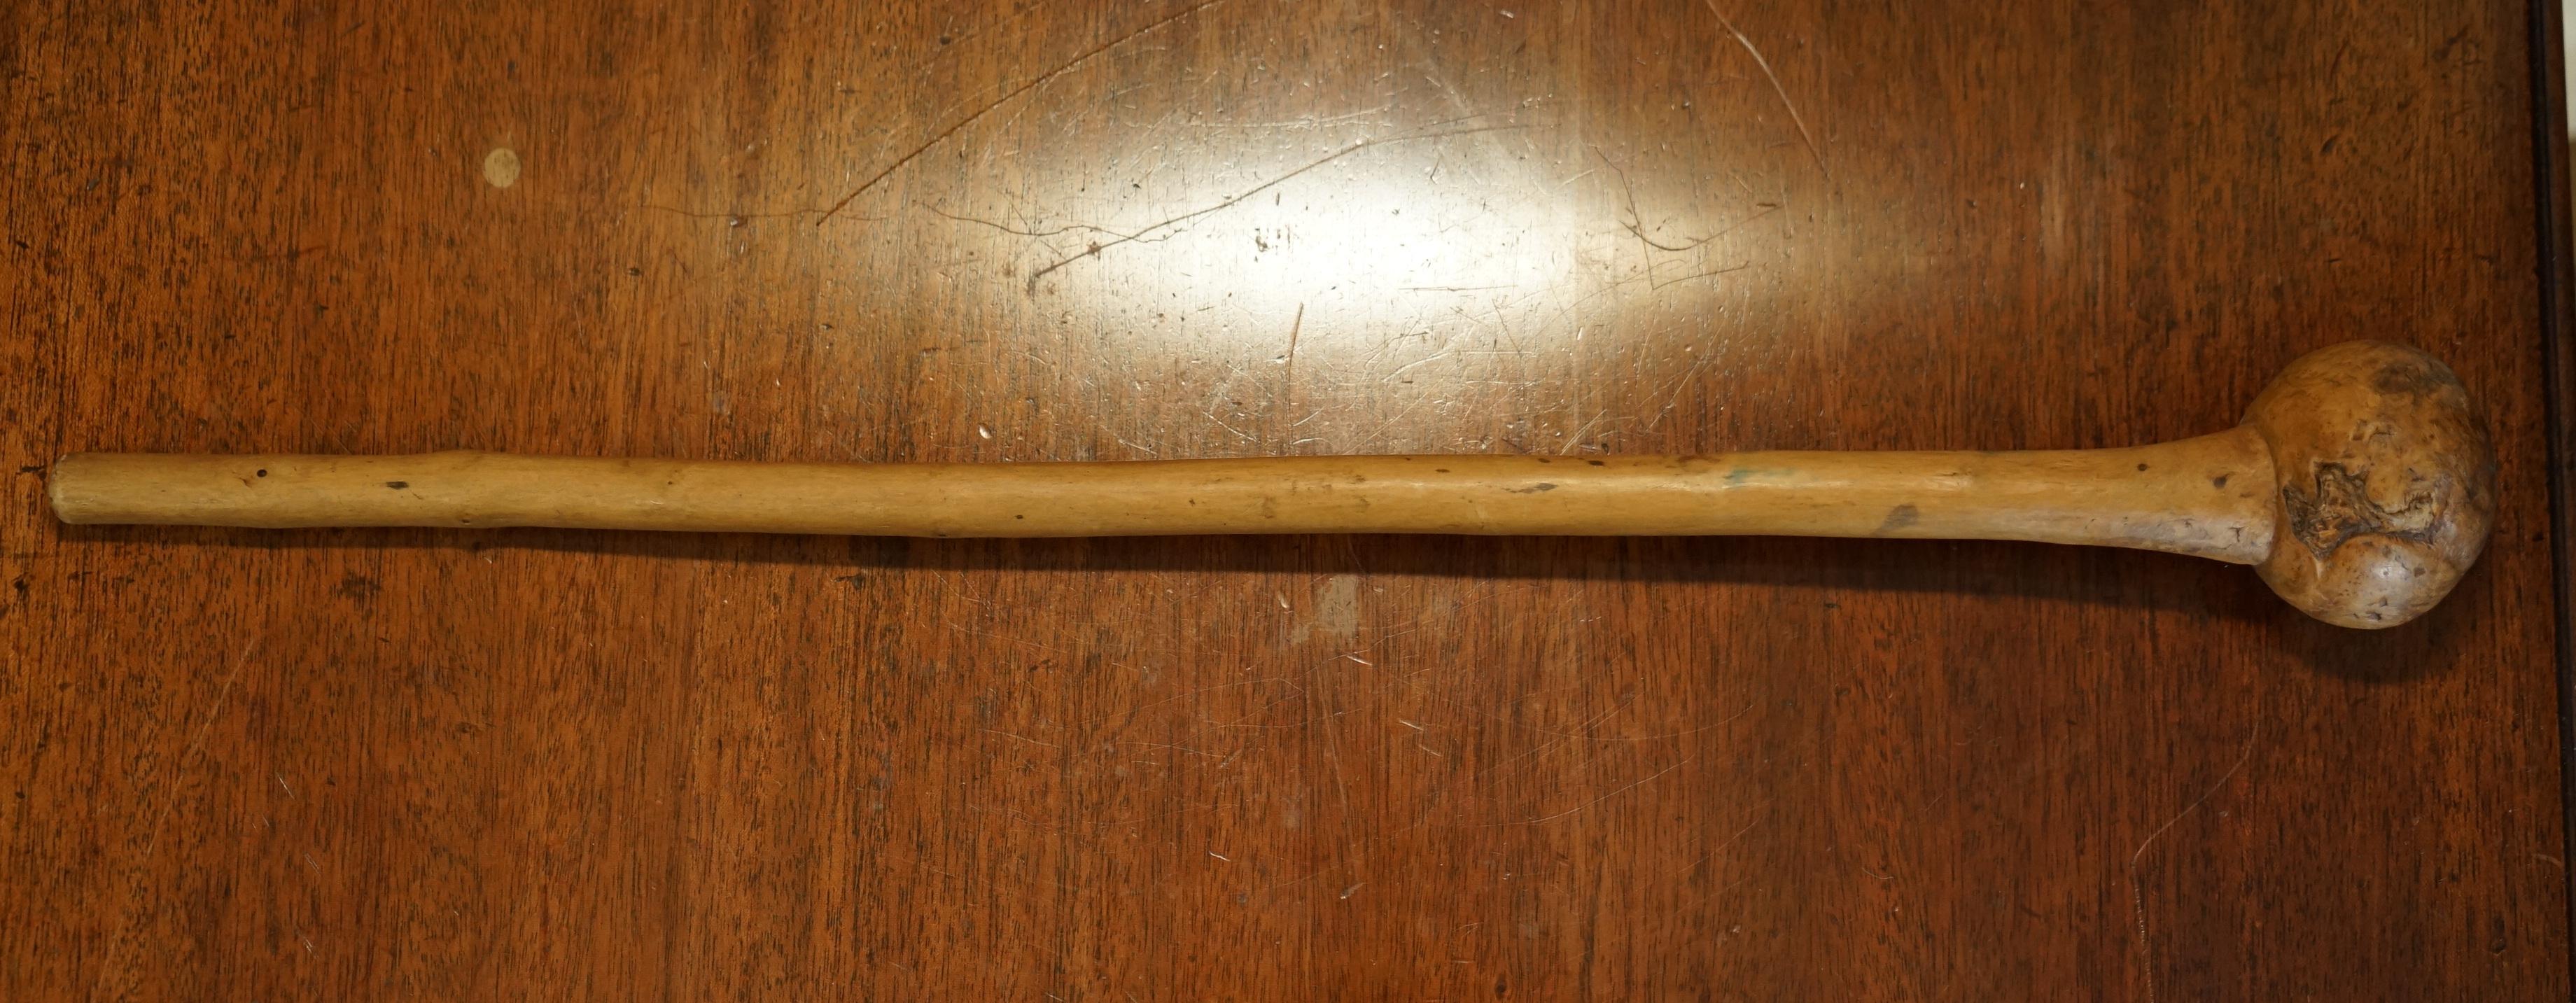 Fine Antique Irish Knobkerrie Stick Very Collectable and Primative One of Two For Sale 11